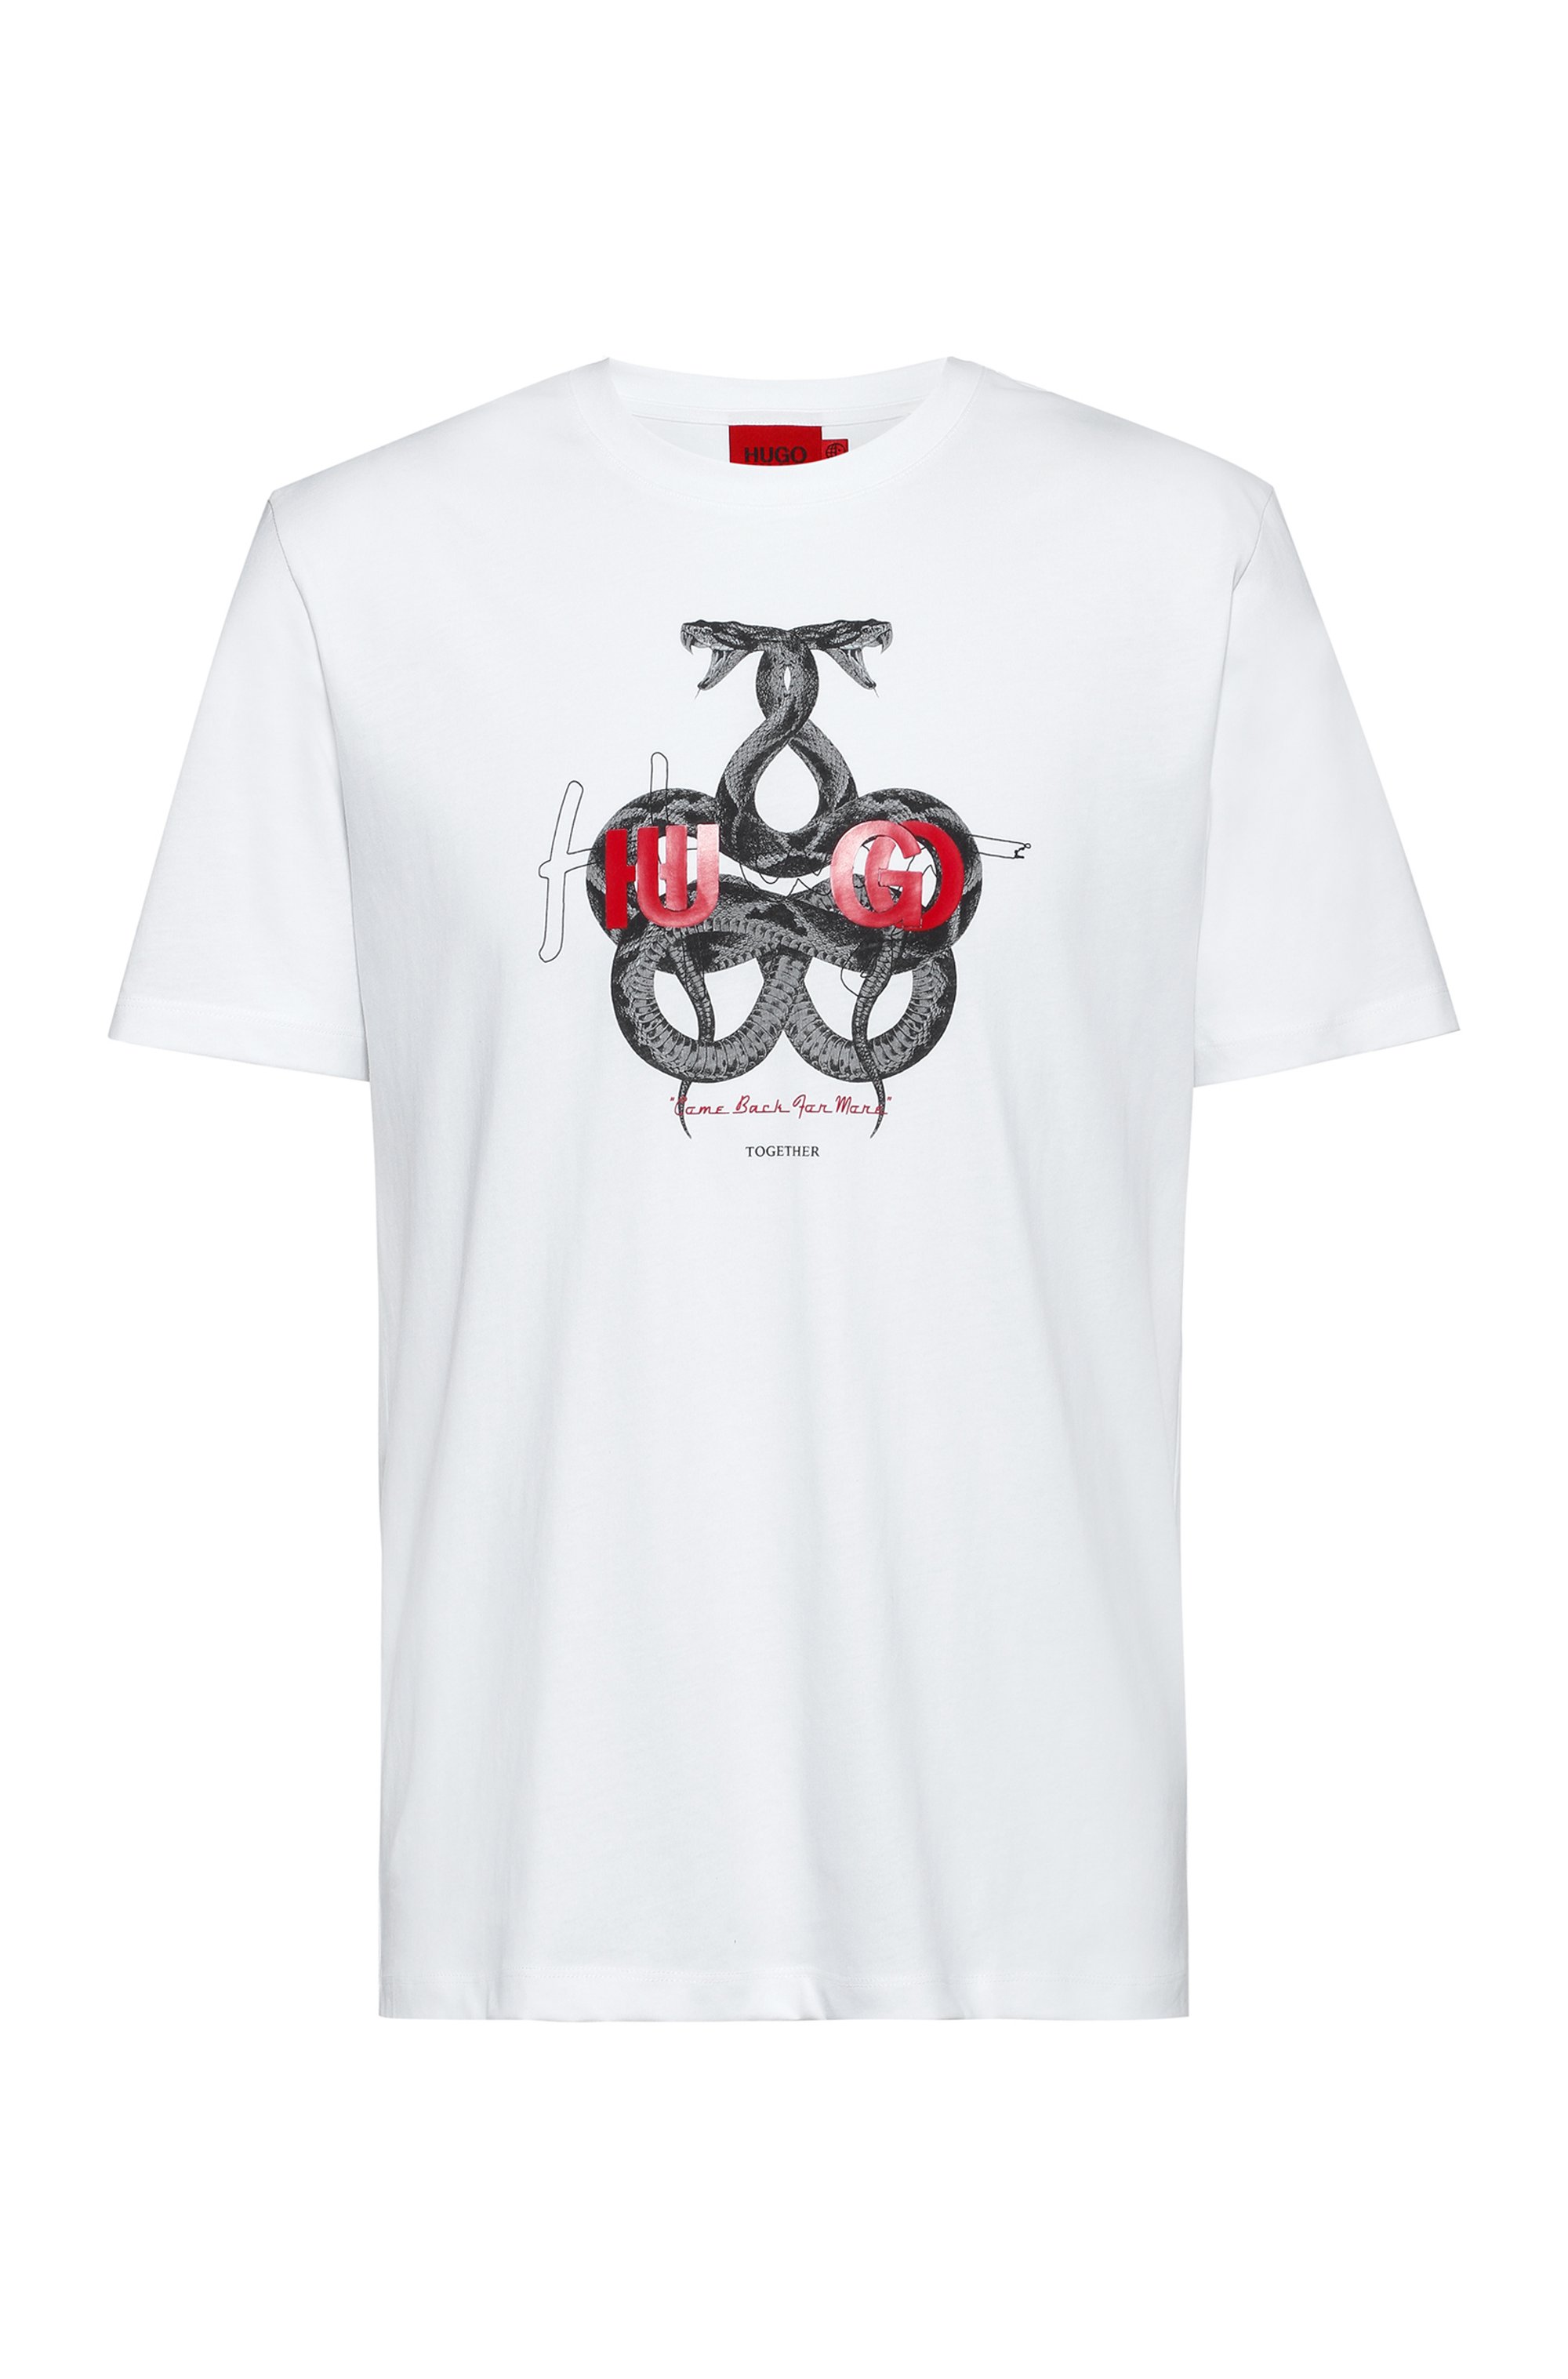 Cotton-jersey T-shirt with logo and snake artwork, White